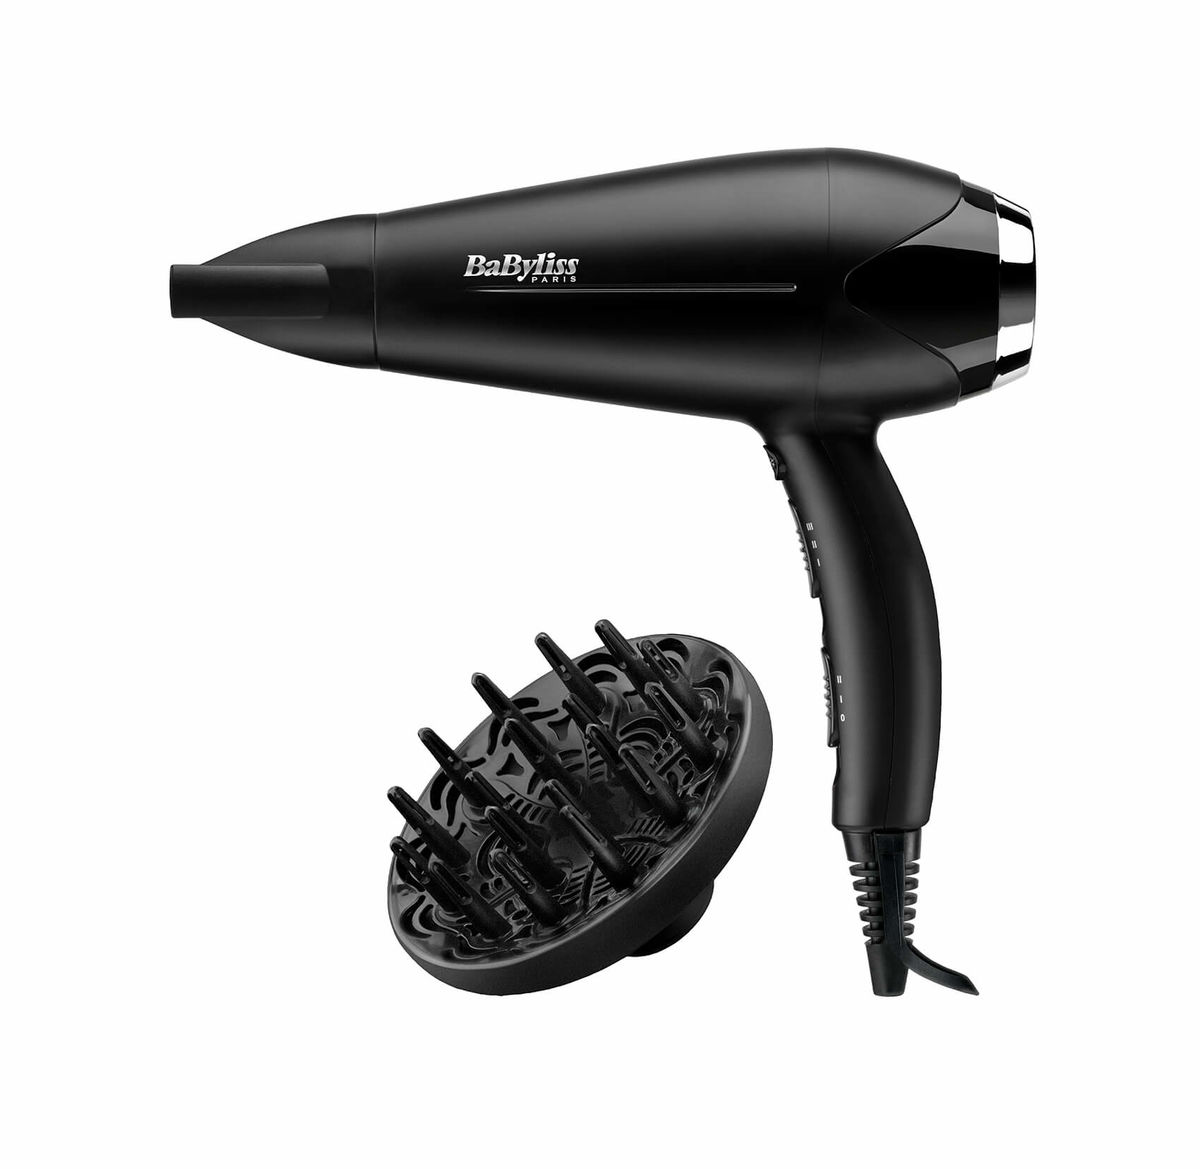 Image of Babyliss D572DCHE Turbo Smooth 2200W Haartrockner bei nettoshop.ch